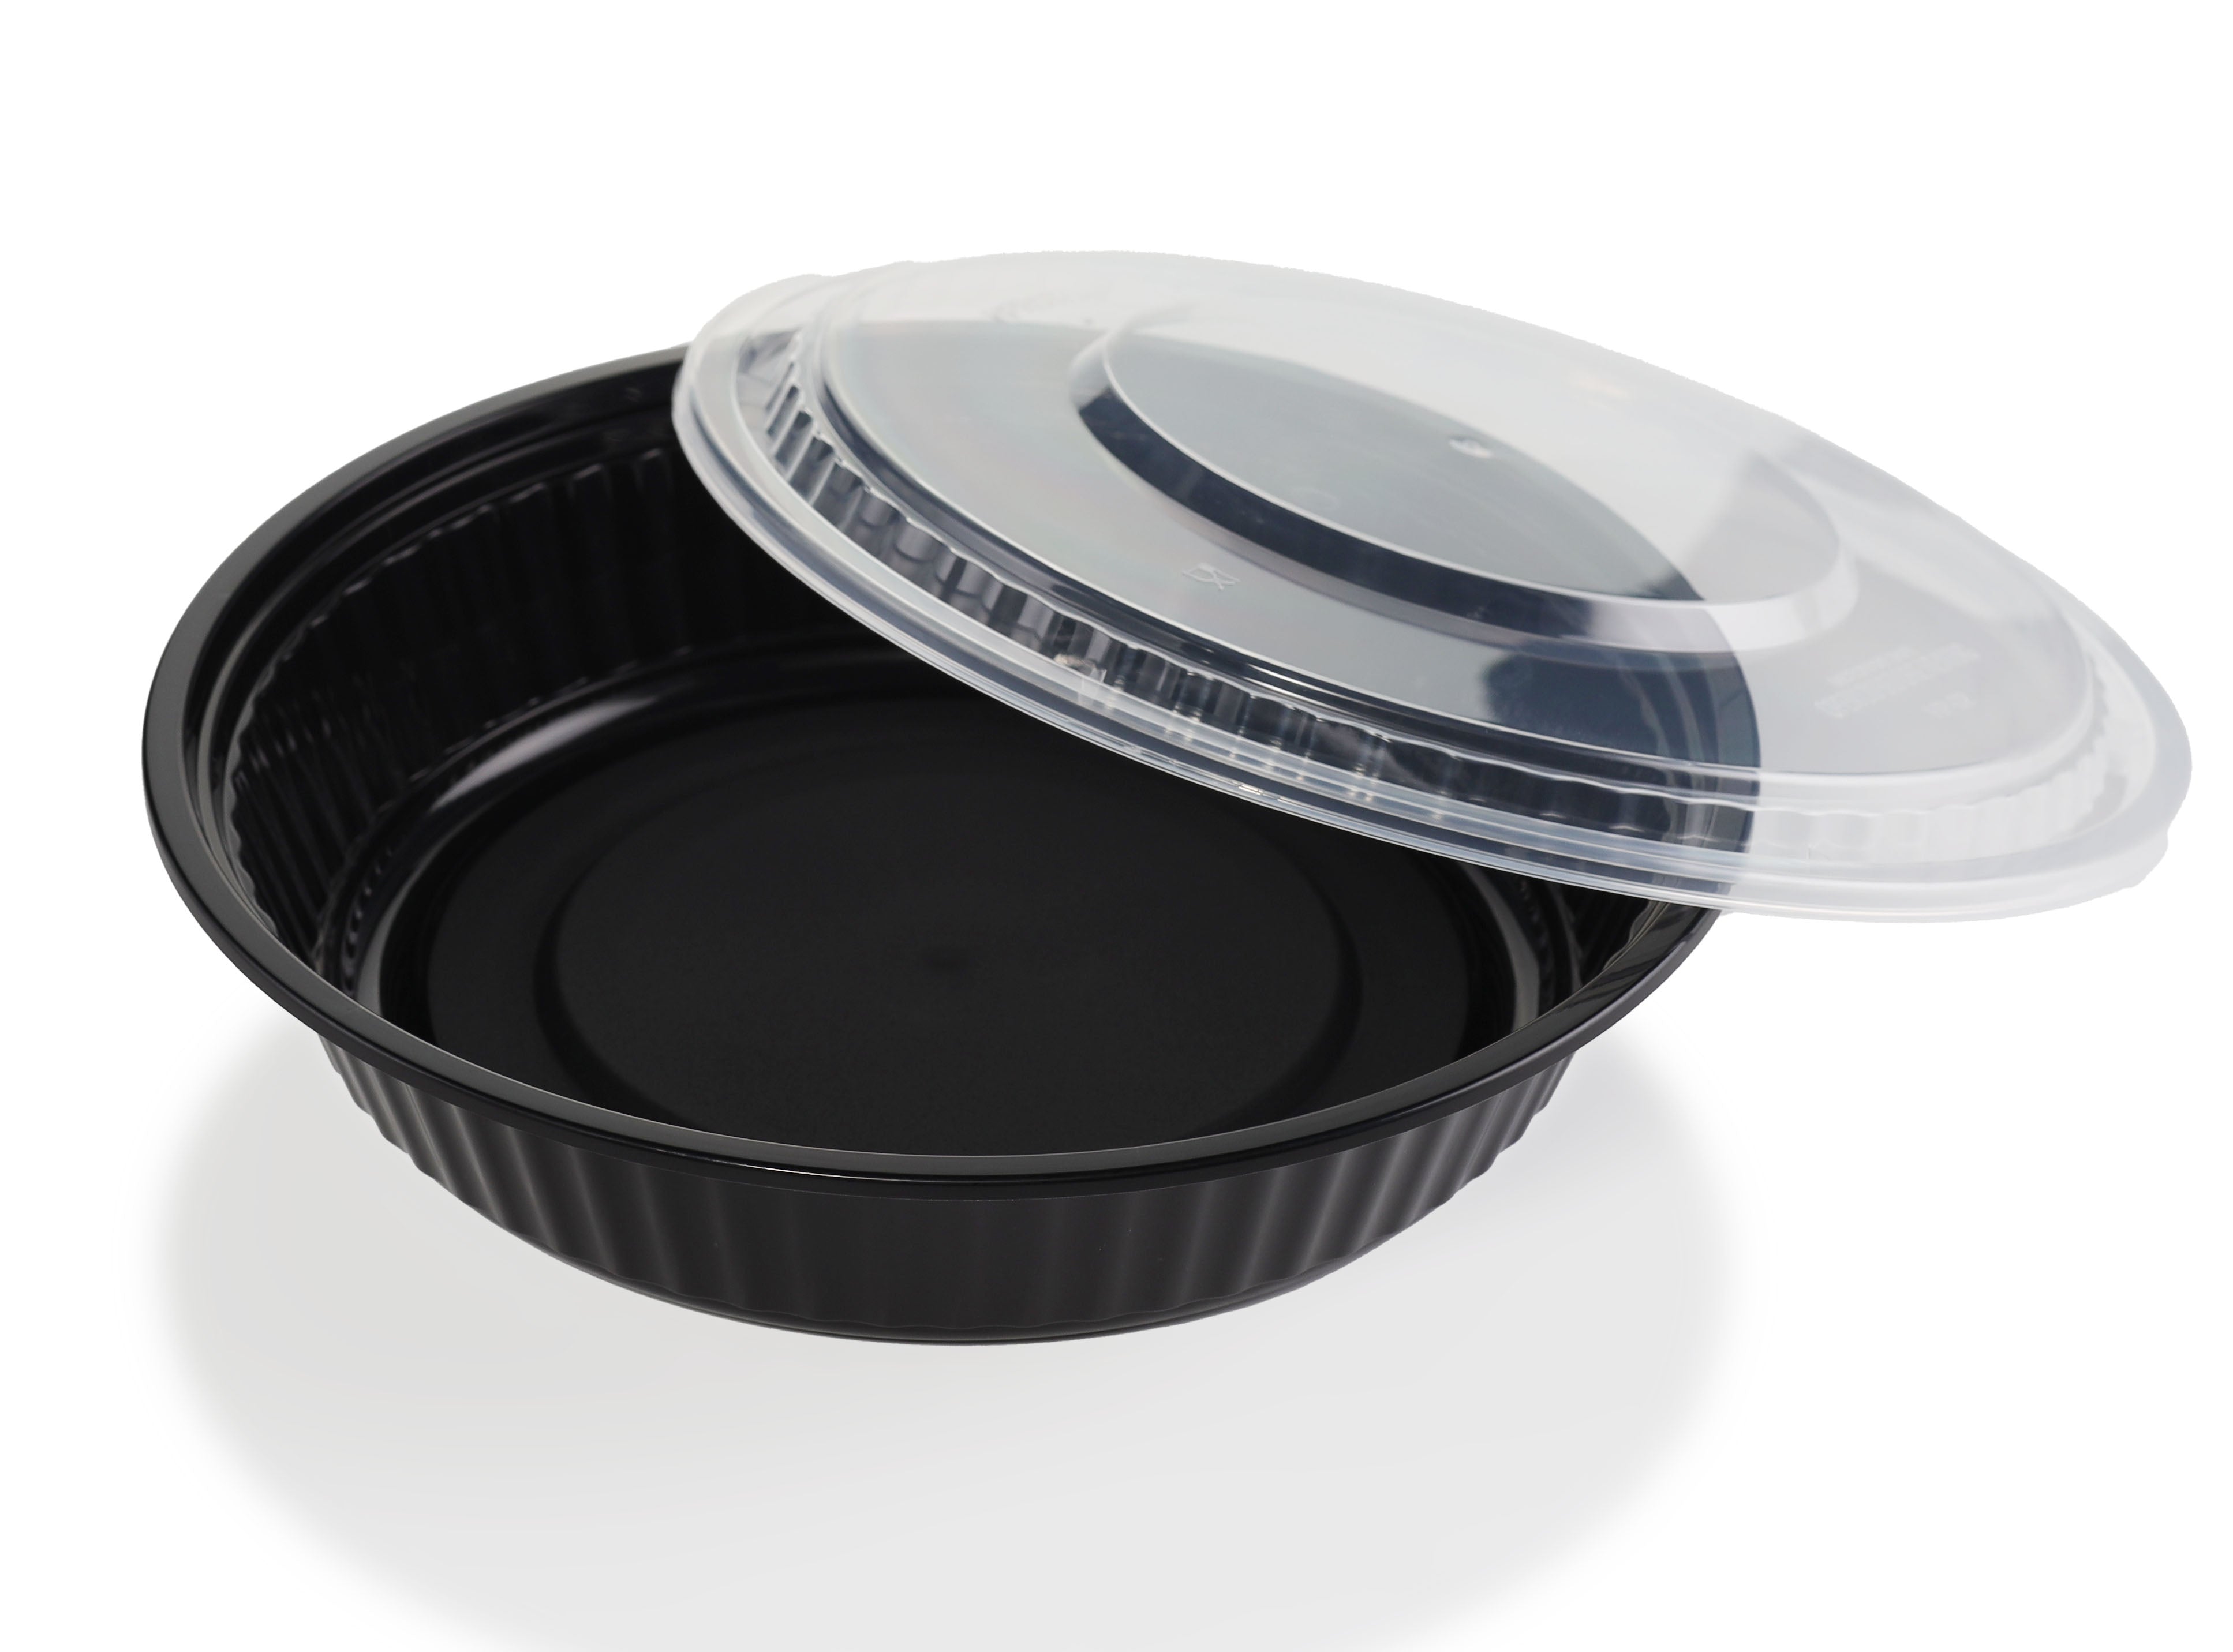 Sazon 37 oz Round Meal Prep Containers, Set of 150